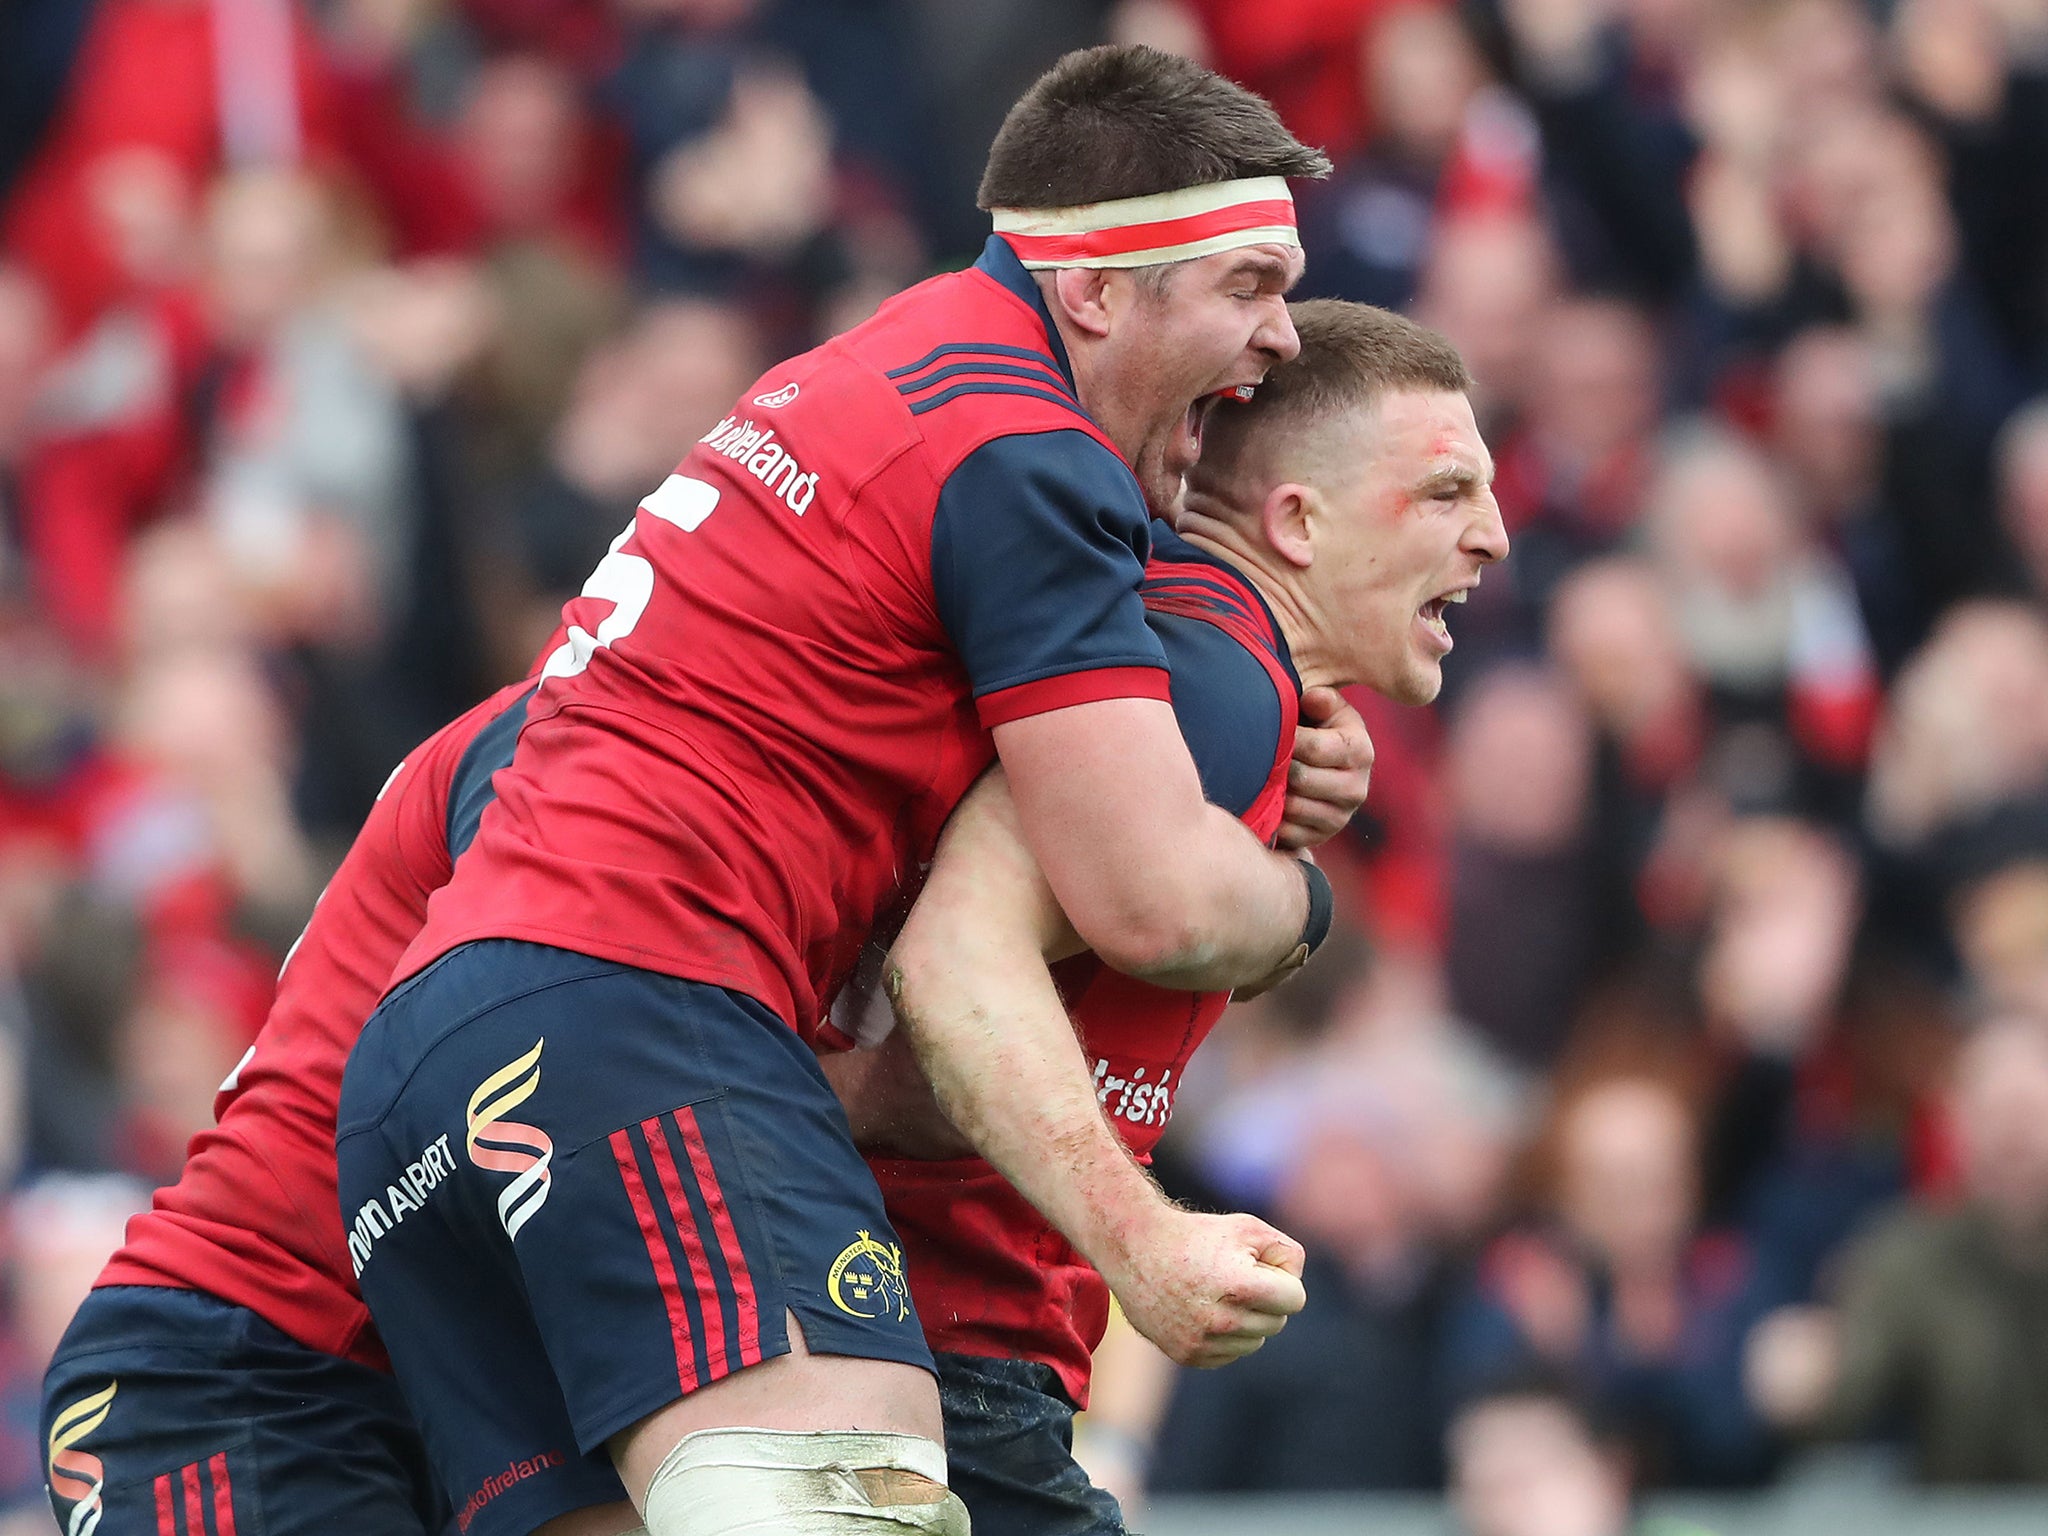 Munster players celebrate after their victory over Toulon